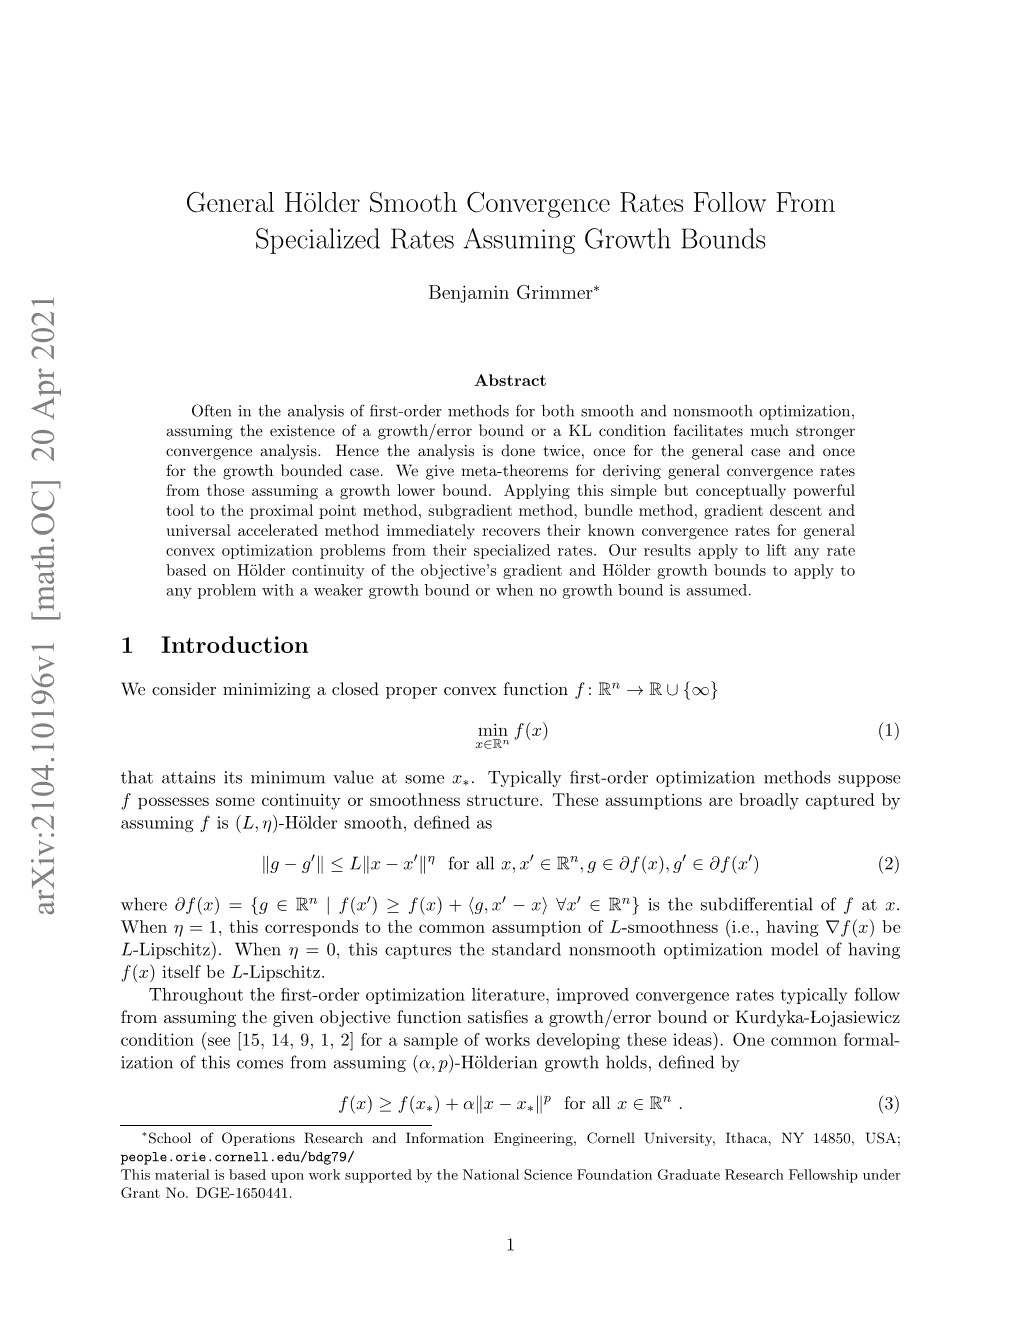 General Hölder Smooth Convergence Rates Follow from Specialized Rates Assuming Growth Bounds